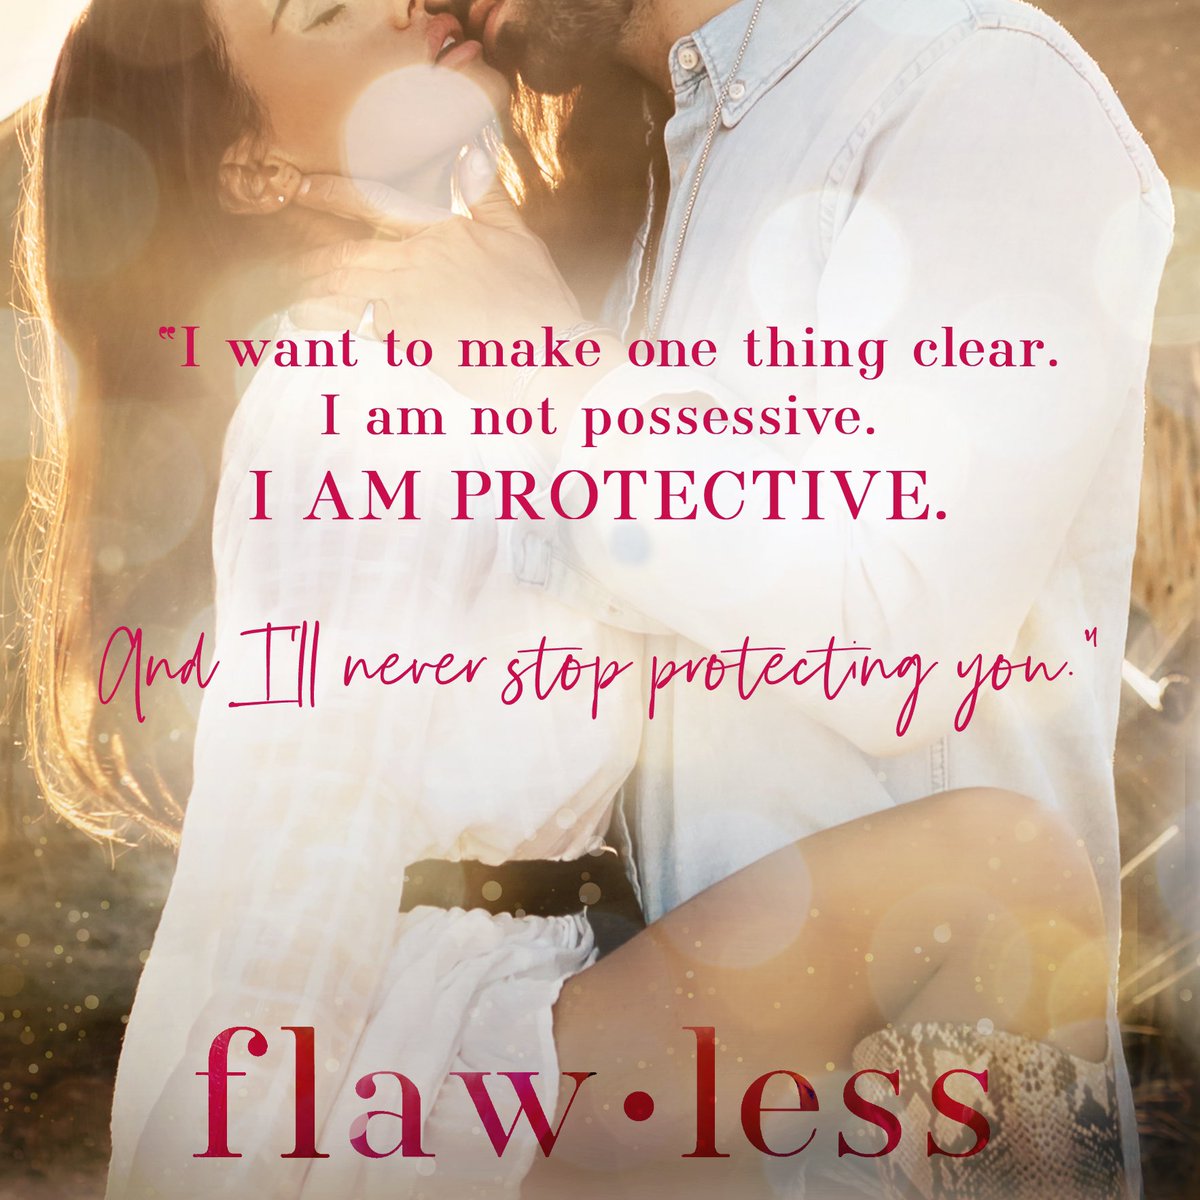 'I want to make one thing clear. I am not possessive. I am protective. And I’ll never stop protecting you.'
Only 3 weeks left! Flawless by Elsie Silver releases June 24th! Who's Excited?? >>>> geni.us/getflawless.       #ComingSoon #ElsieSilver